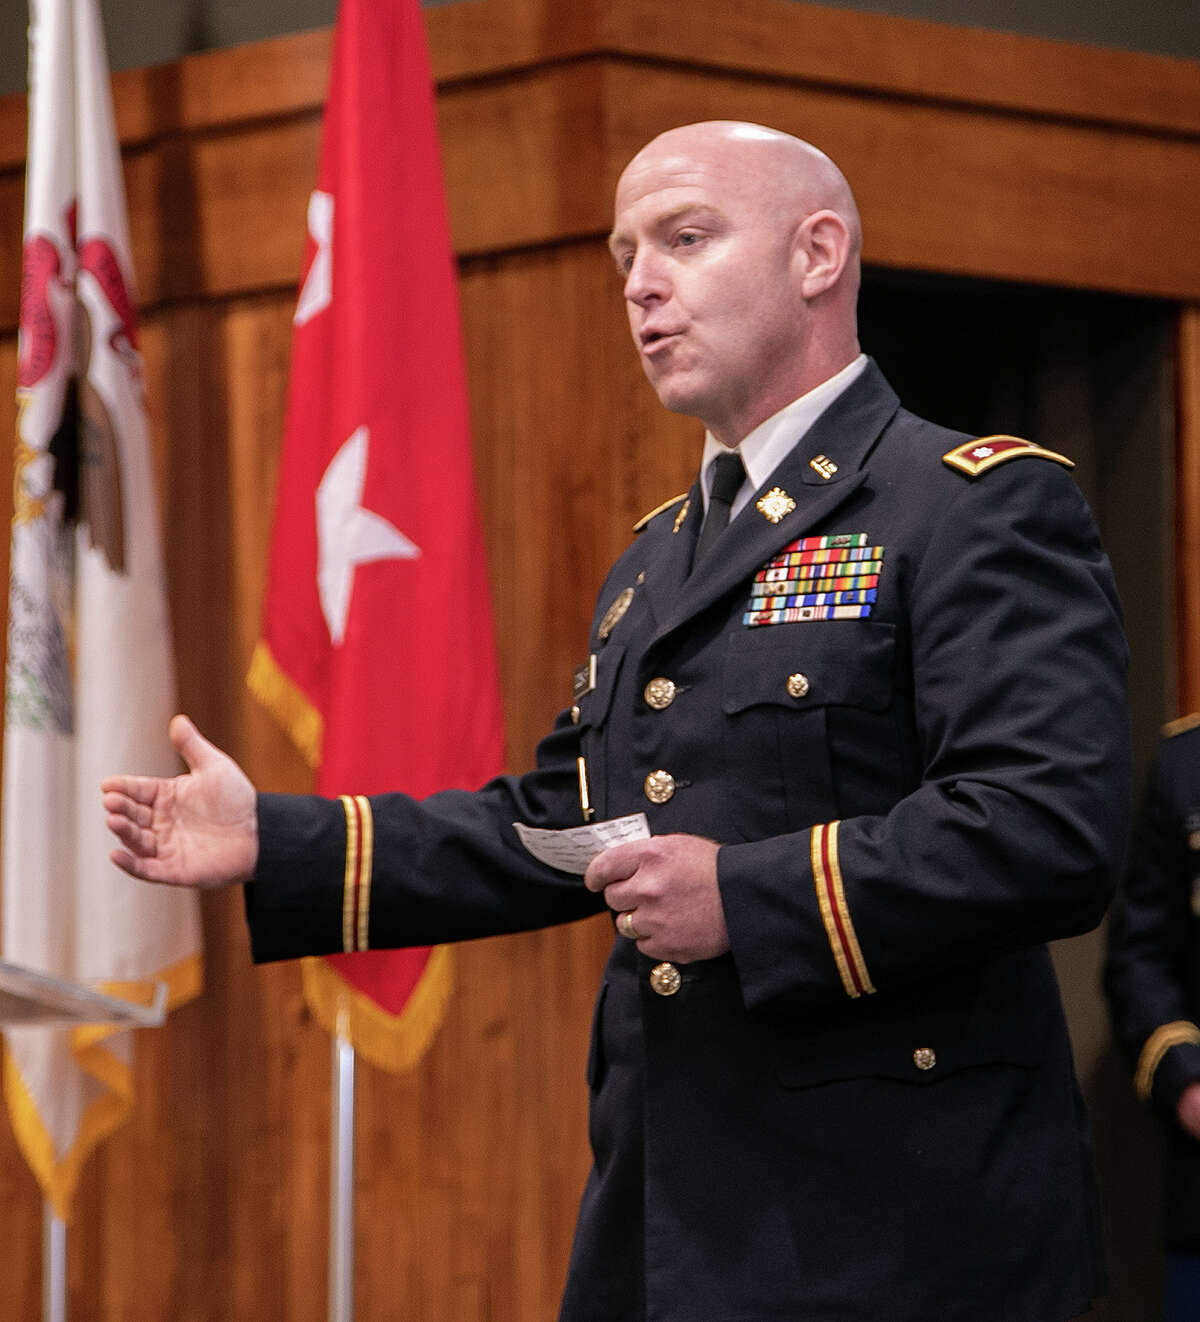 Newly promoted Lt. Col. Matthew Dodsworth thanks family and friends for their support throughout his career at a promotion ceremony at the Illinois Military Academy at Camp Lincoln.